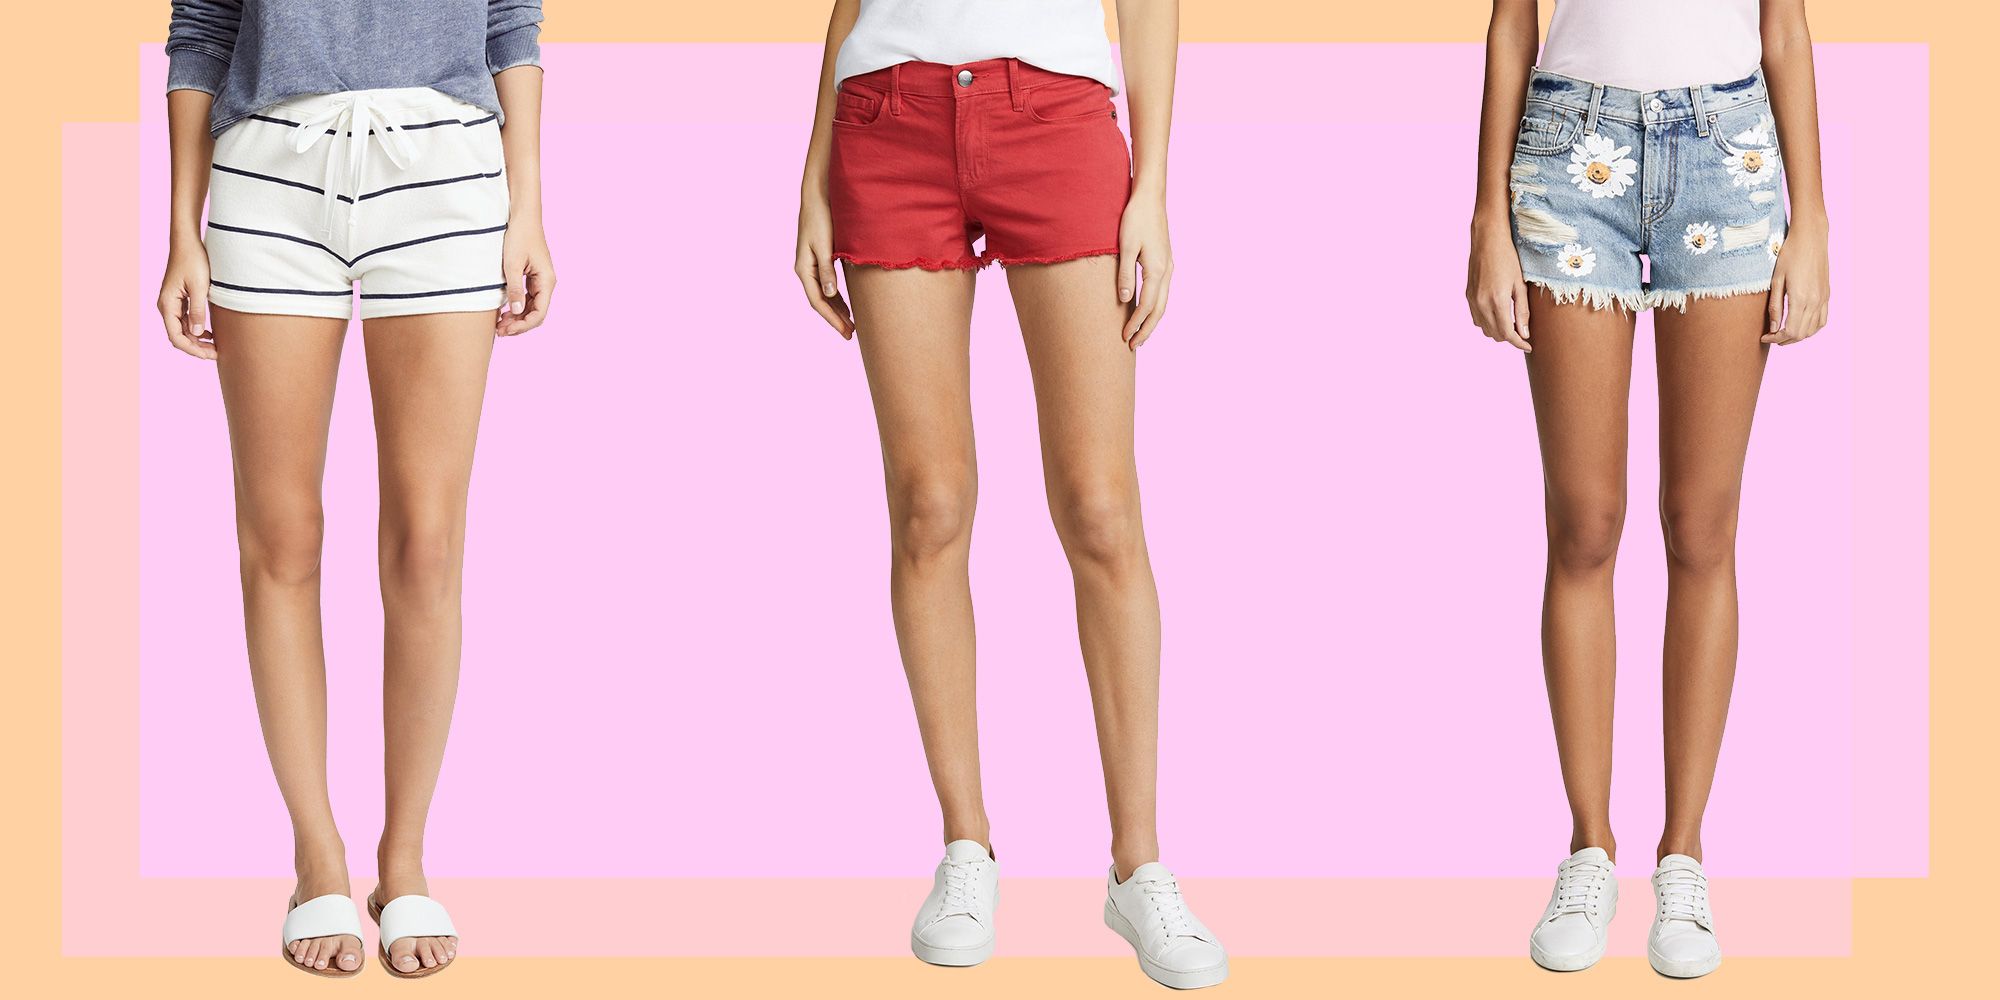 Woman wearing red sleeveless shirt and white short shorts leaning on white-and-red  roll-up door photo – Free Red Image on Unsplash